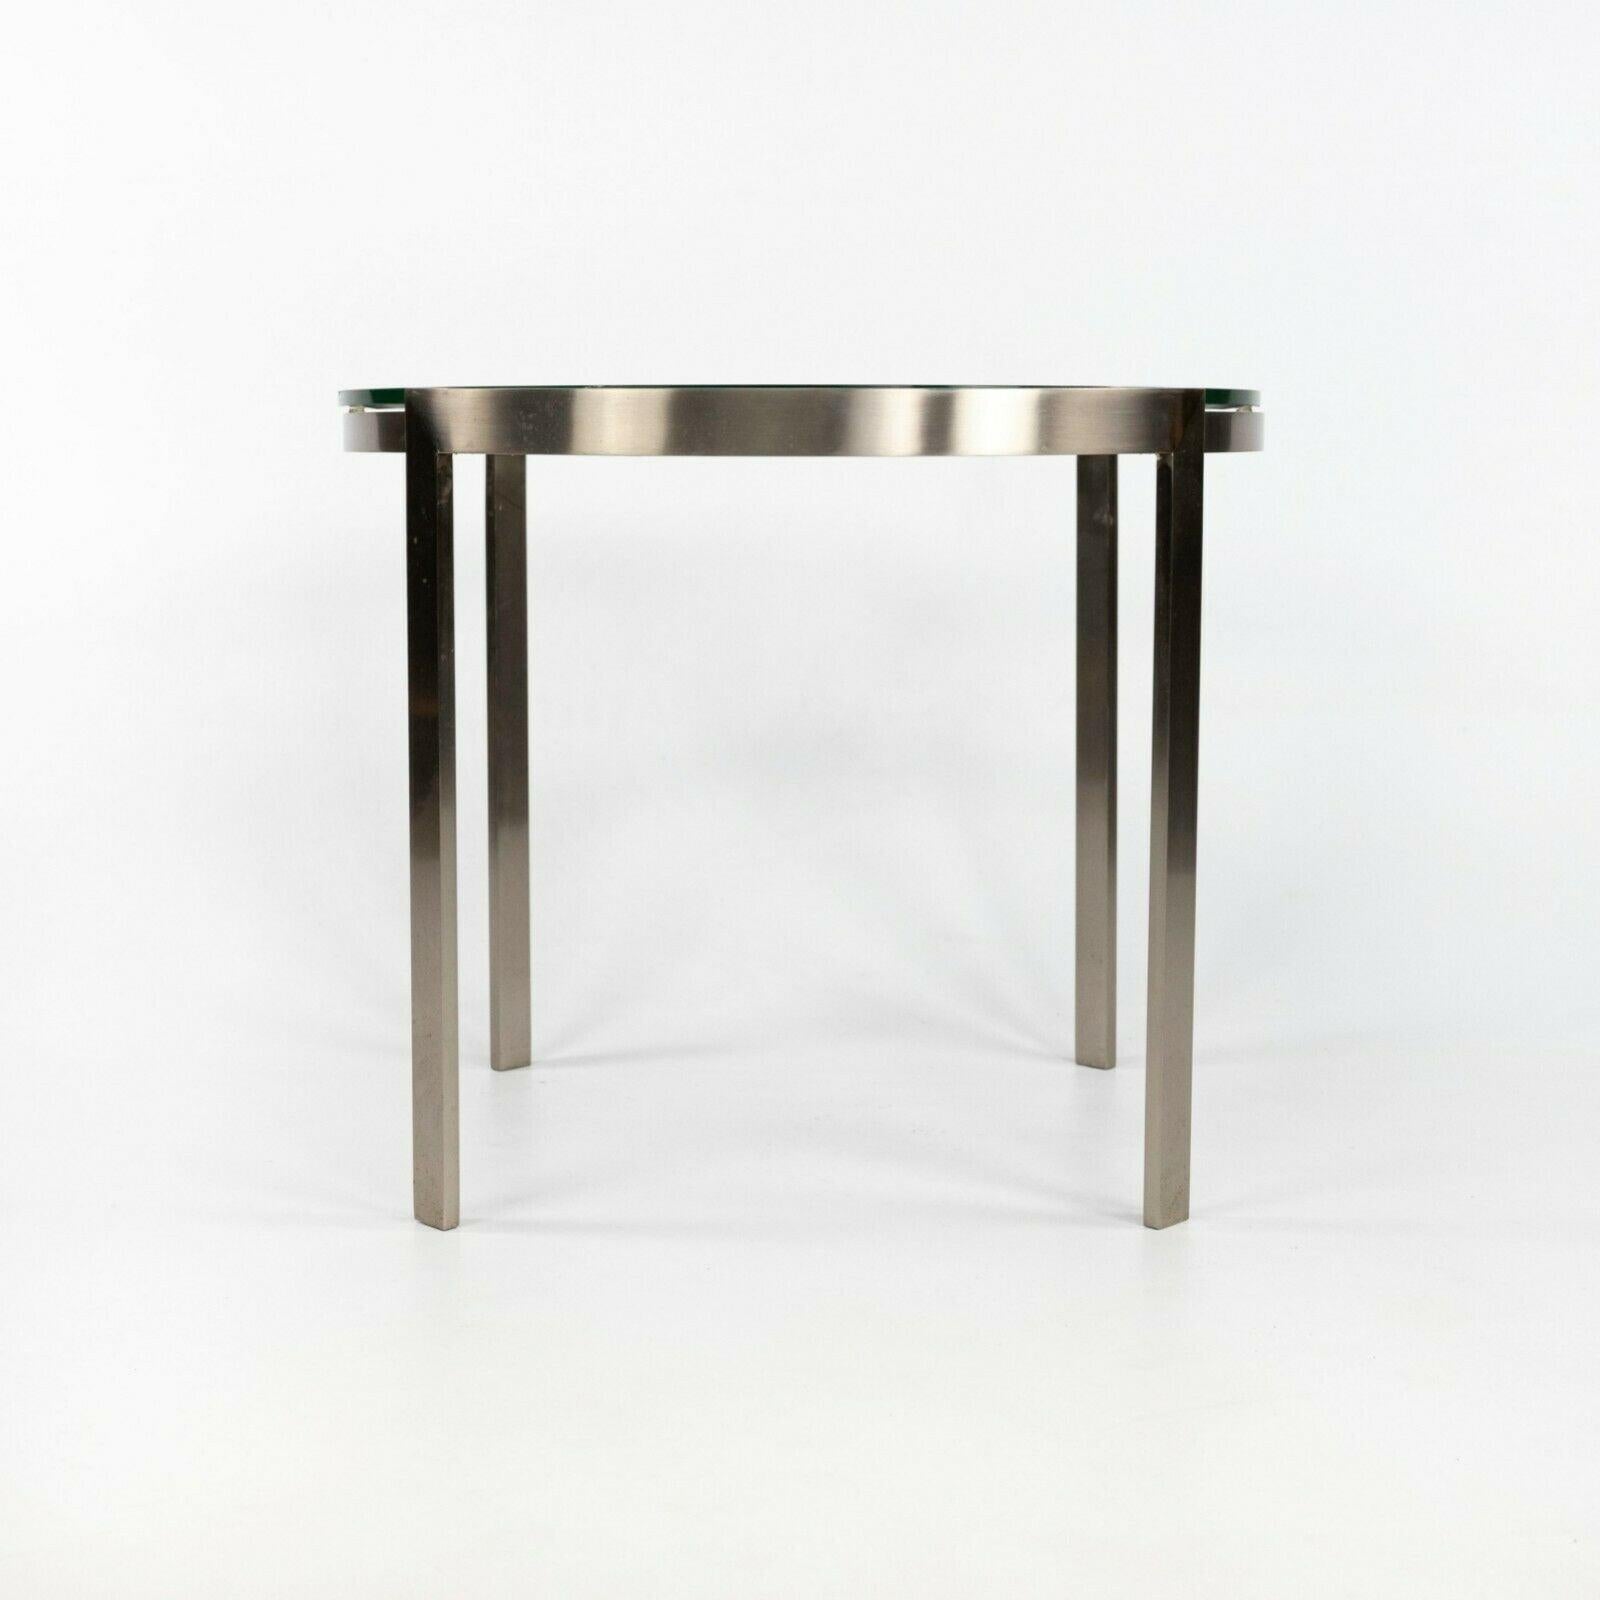 American 2010s Geiger Metal Series Matte Stainless Steel and Glass End Table / Side Table For Sale